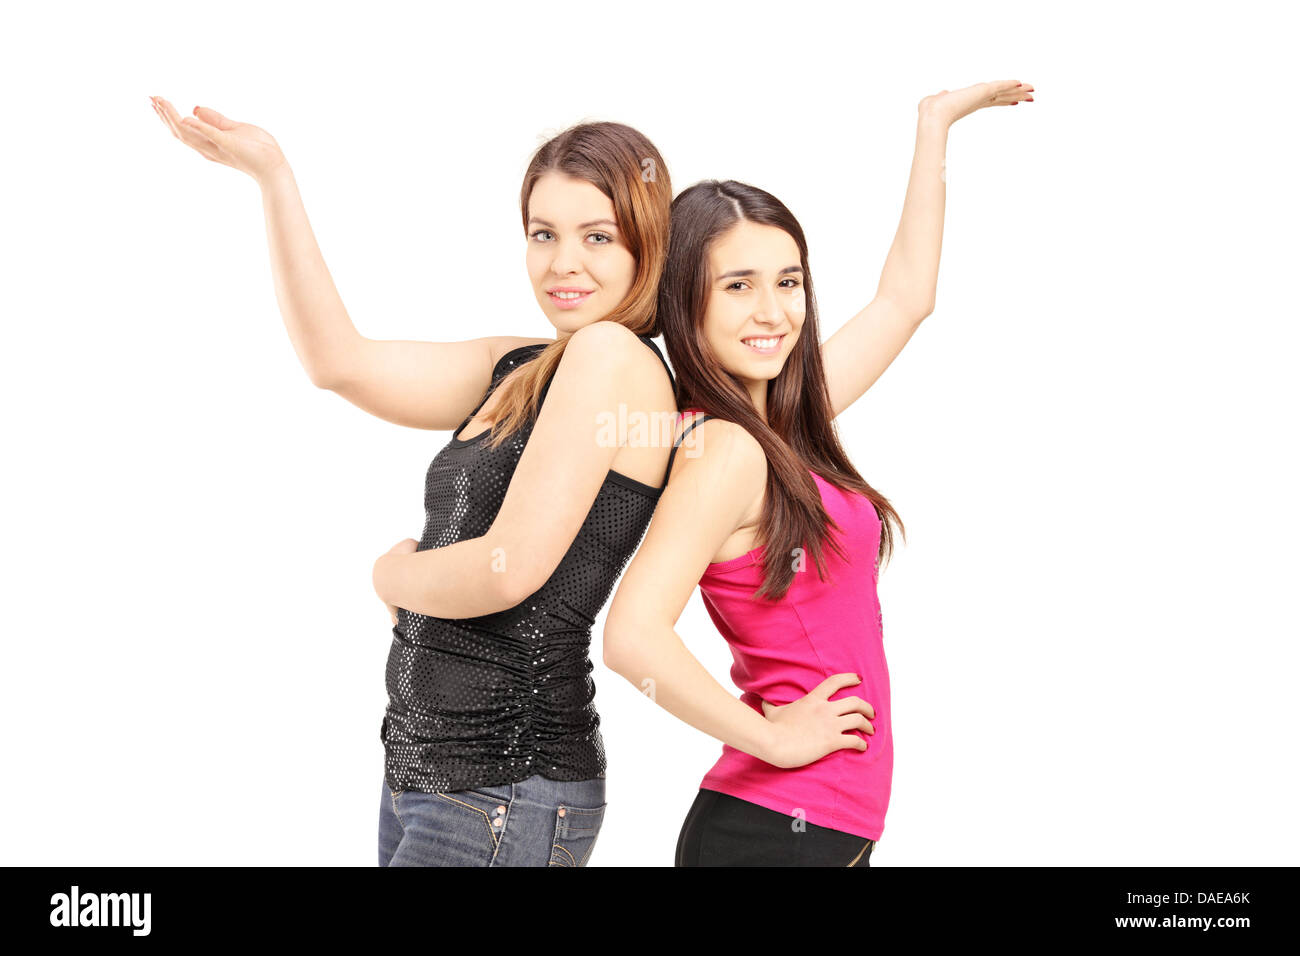 Happy girlfriends standing close together and gesturing with their hands Stock Photo